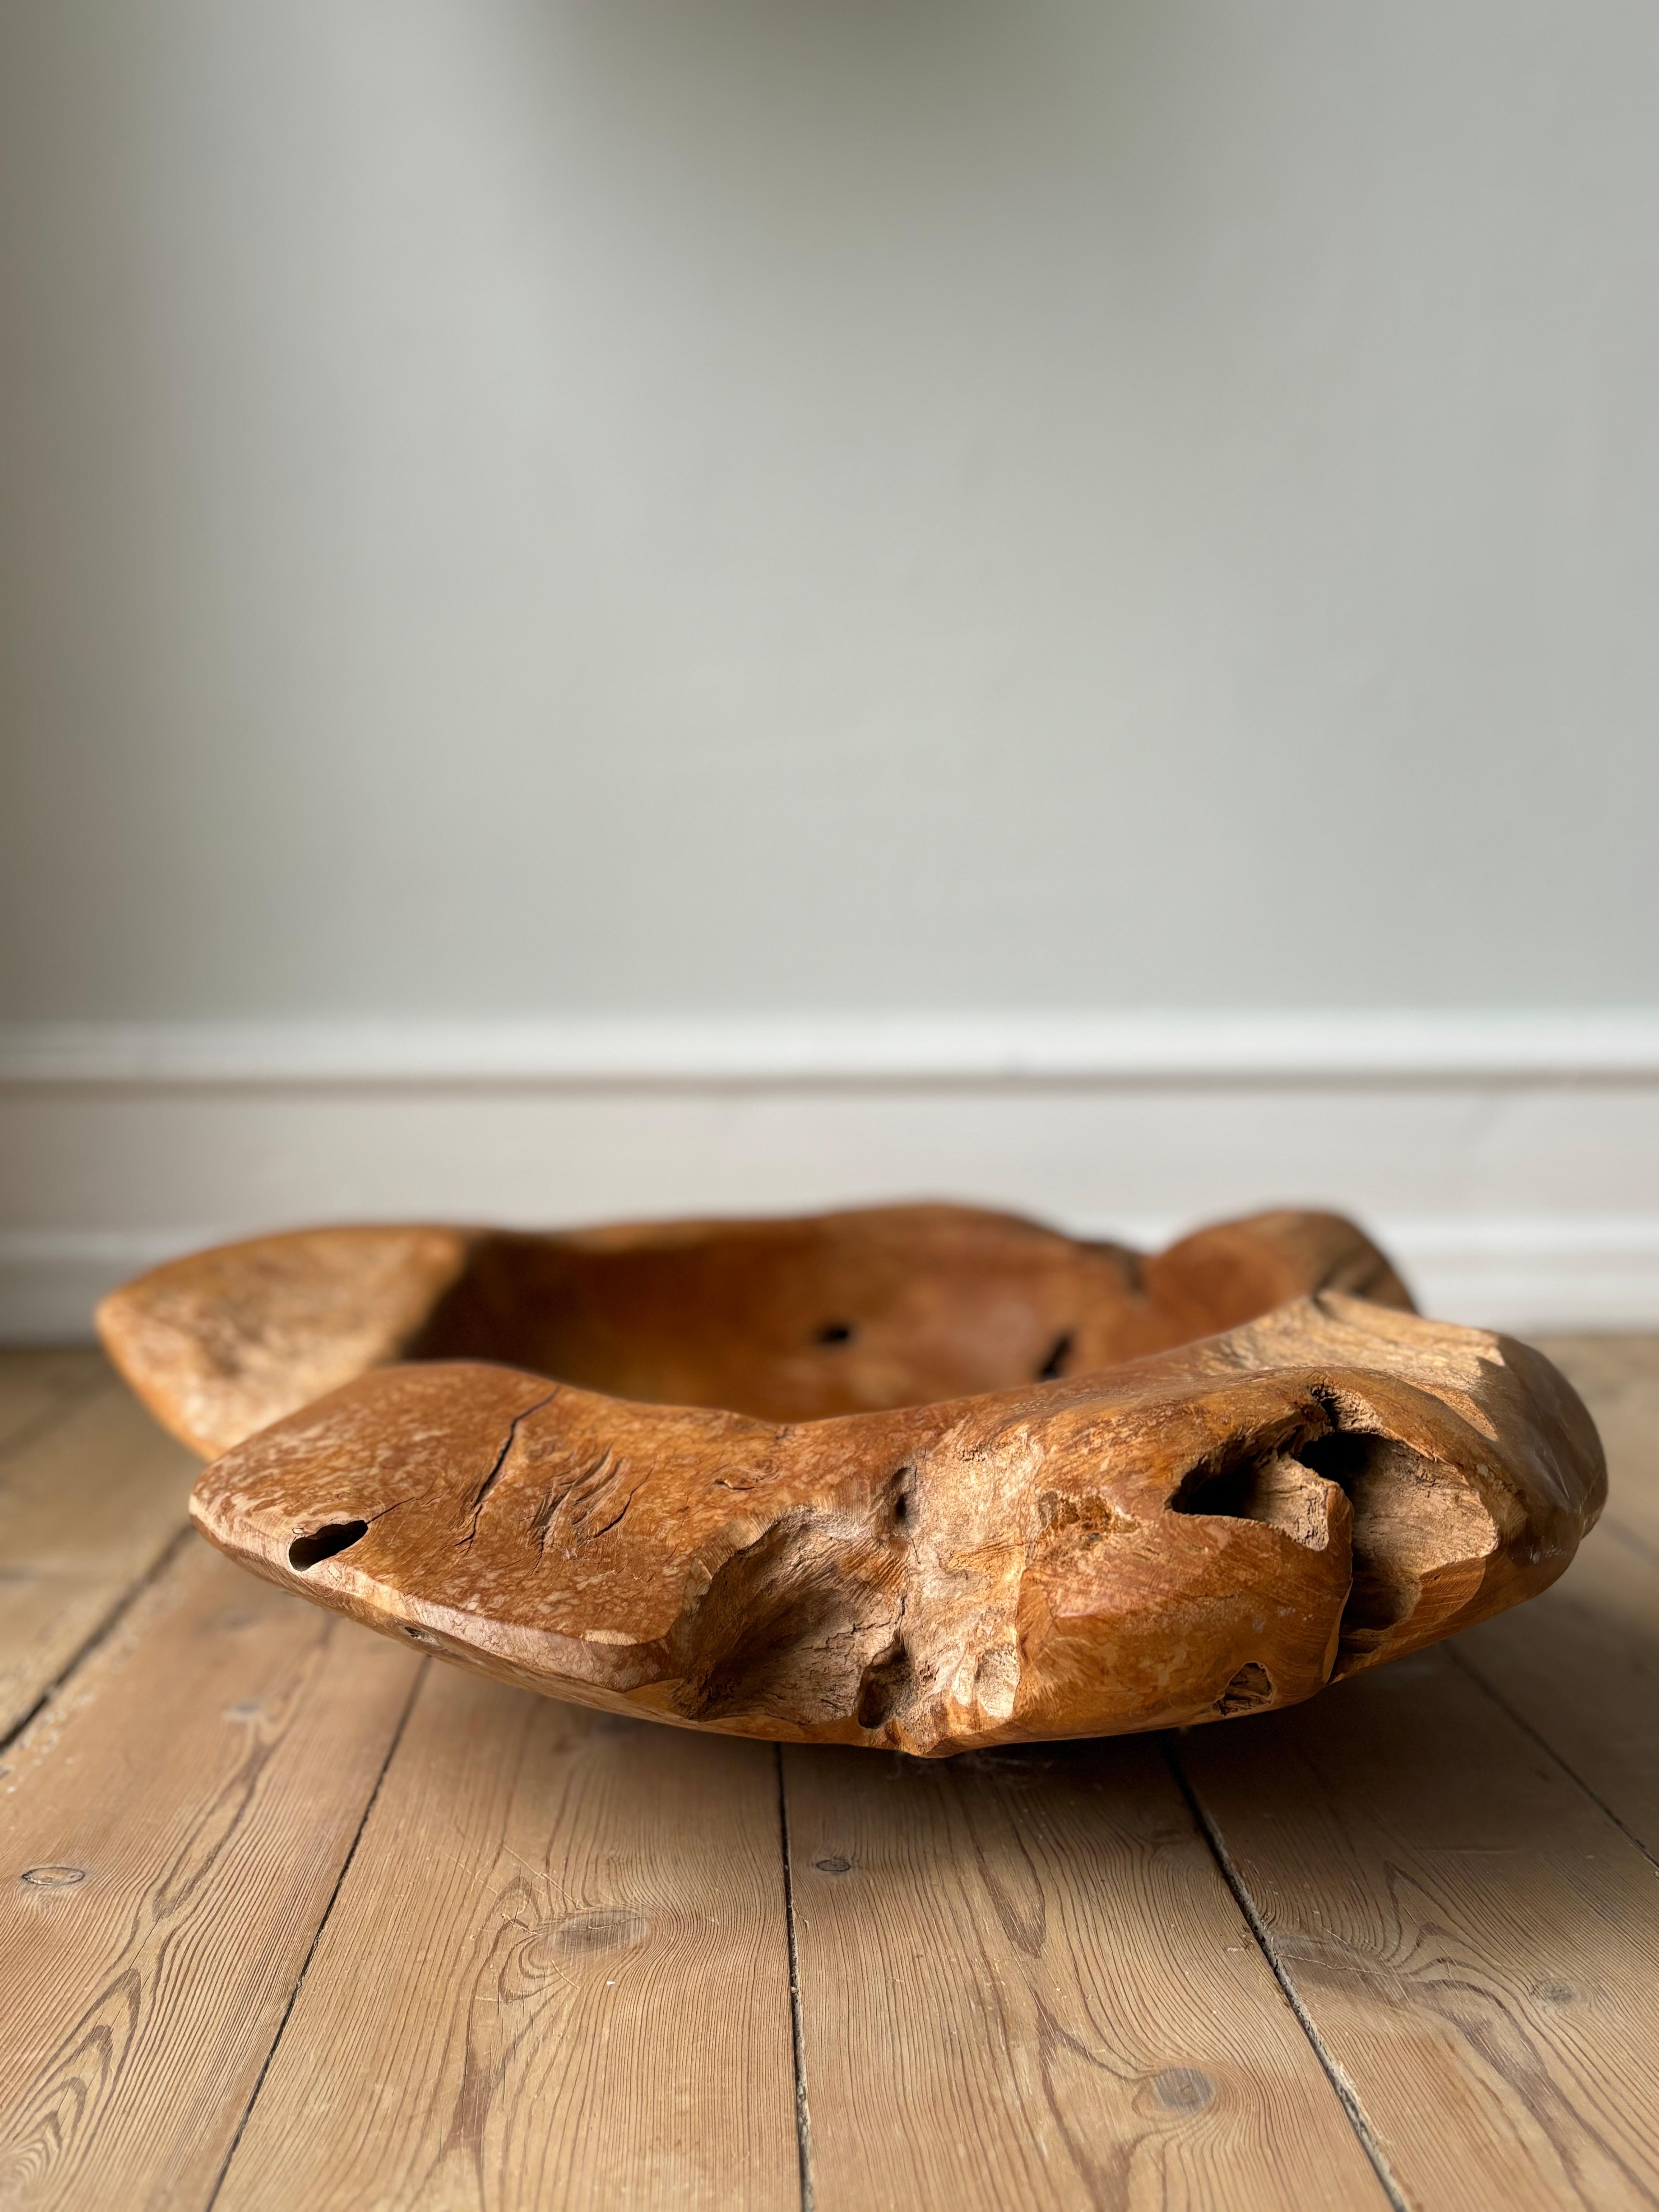 X-Large Vintage French Olive Wood Bowl, Early 20th Century For Sale 4